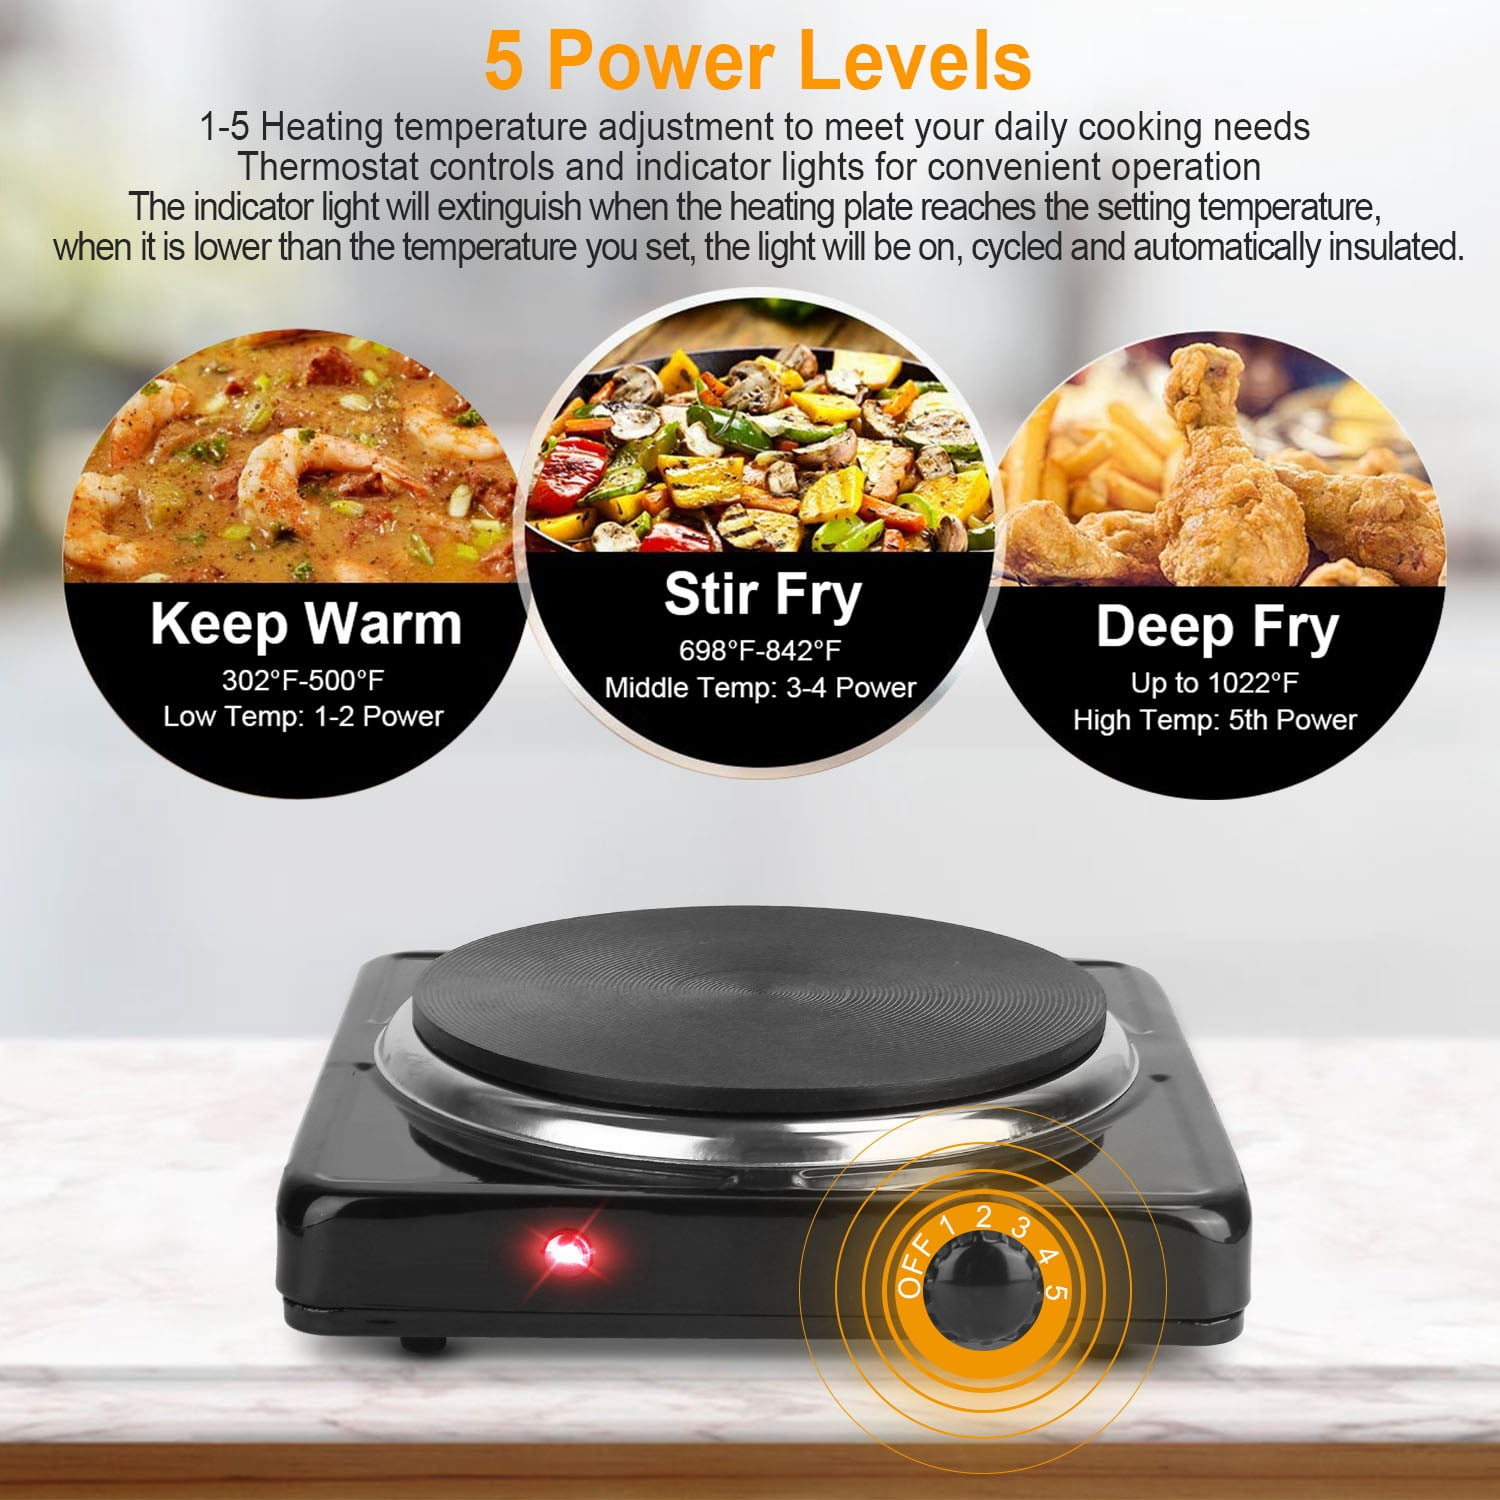 Dropship 1500W Electric Single Burner Portable Heating Hot Plate Stove  Countertop RV Hotplate With Non Slip Rubber Feet 5 Temperature Adjustments  to Sell Online at a Lower Price